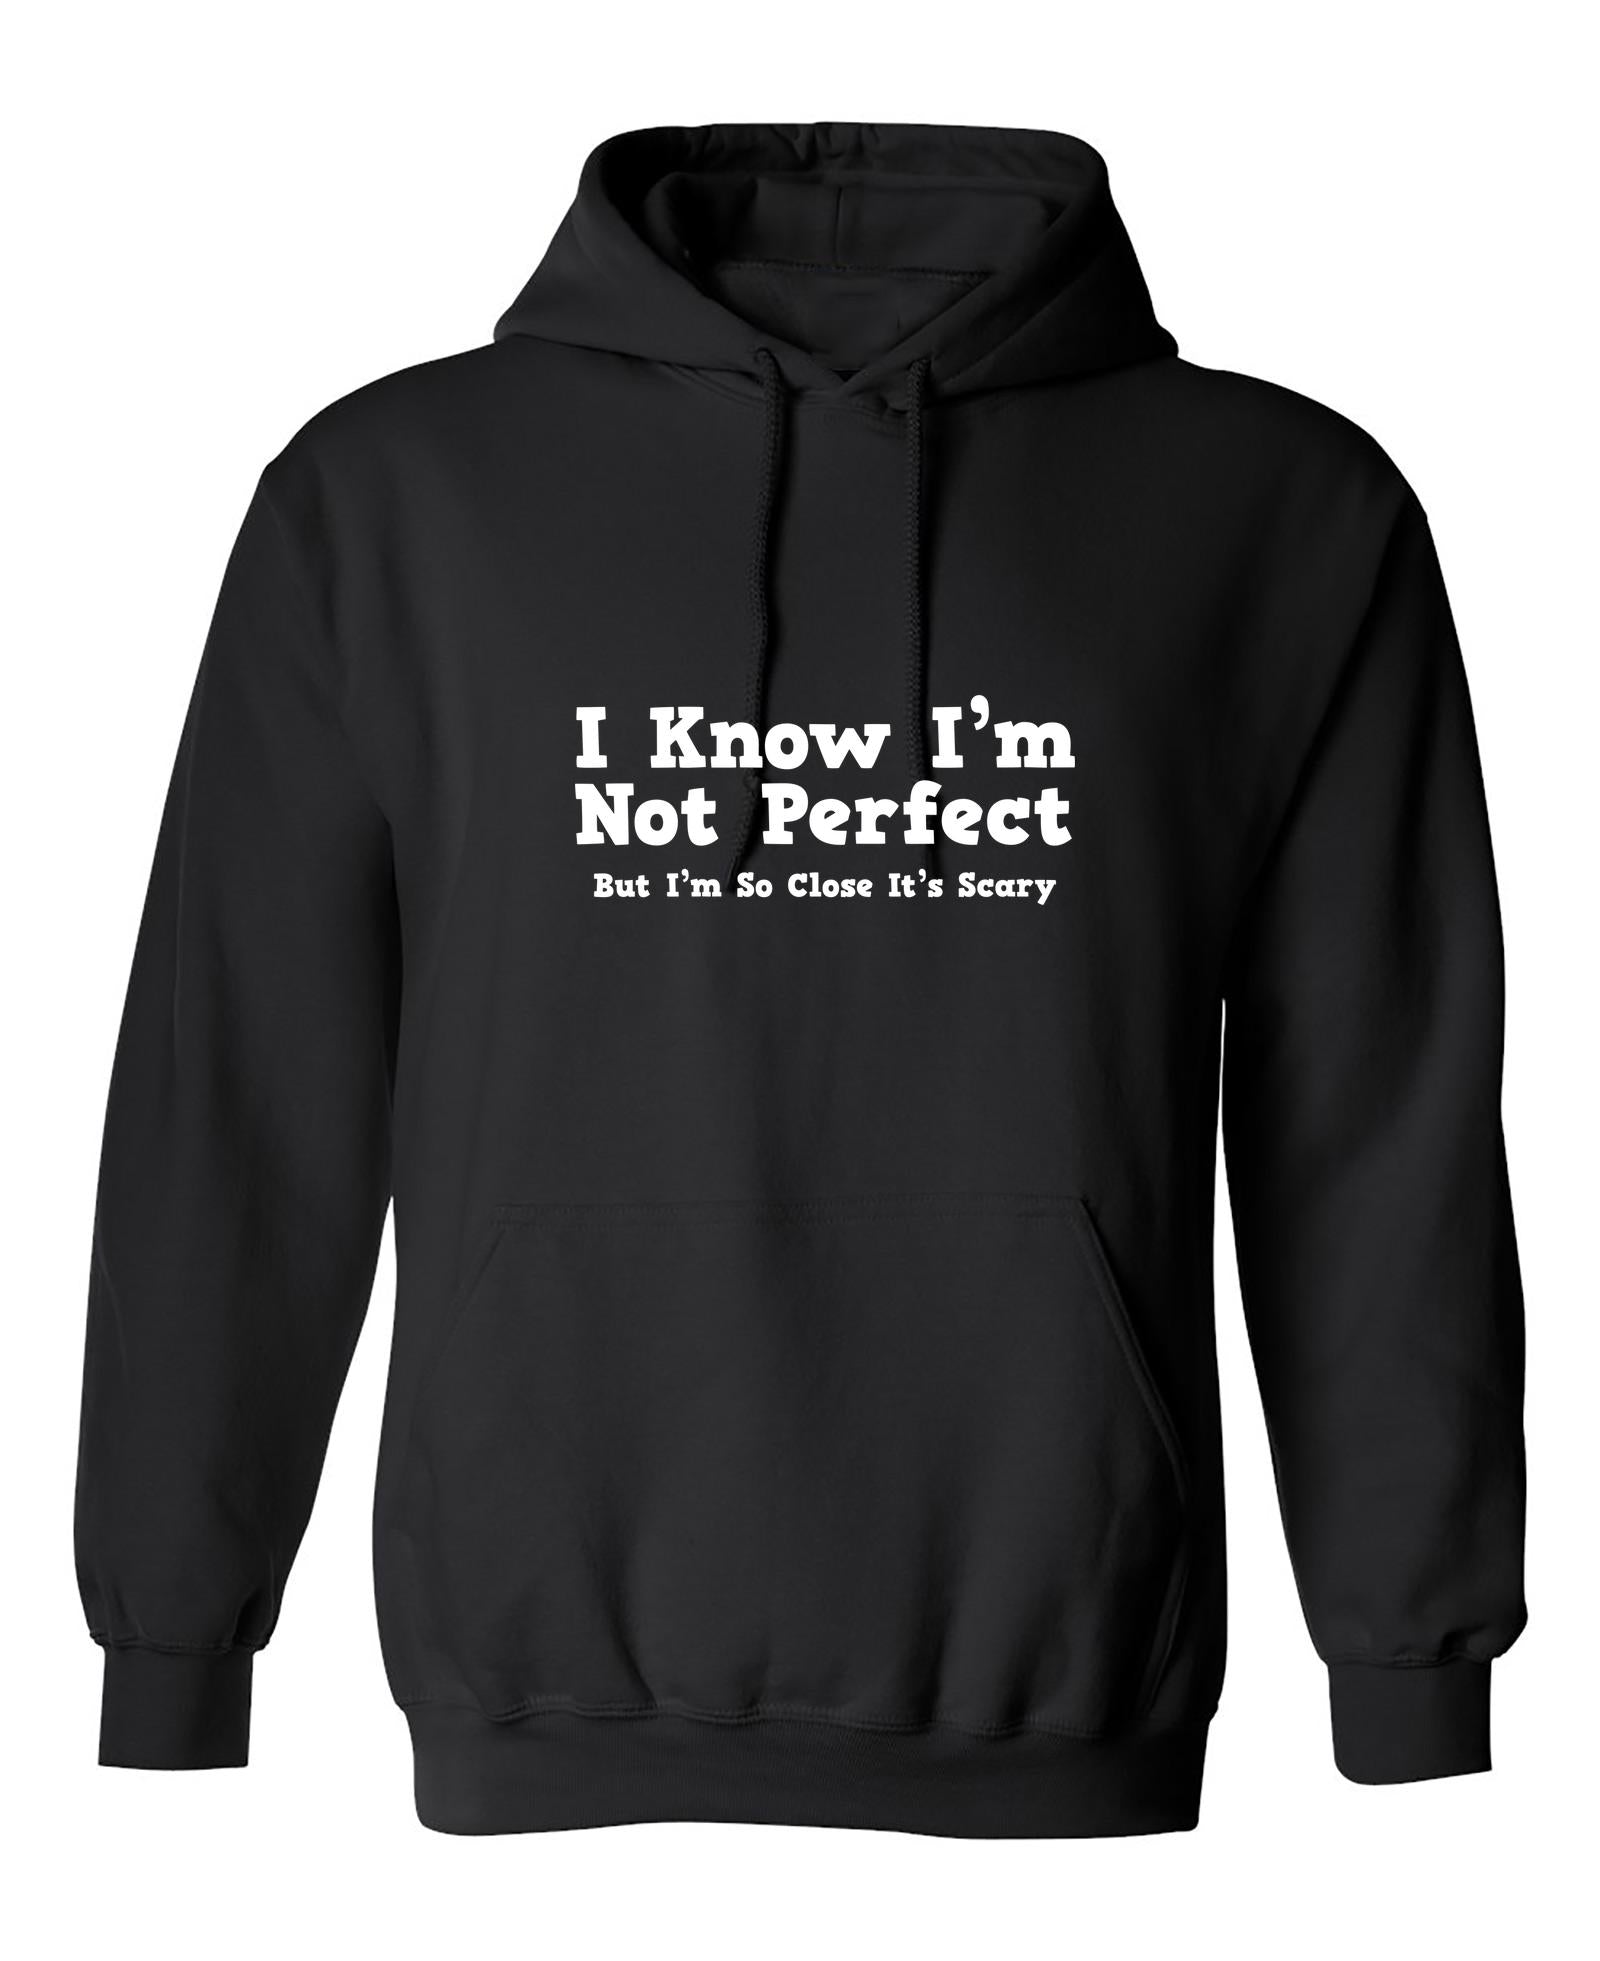 Funny T-Shirts design "I Know I'm Not Perfect But I'm So Close It's Scary"